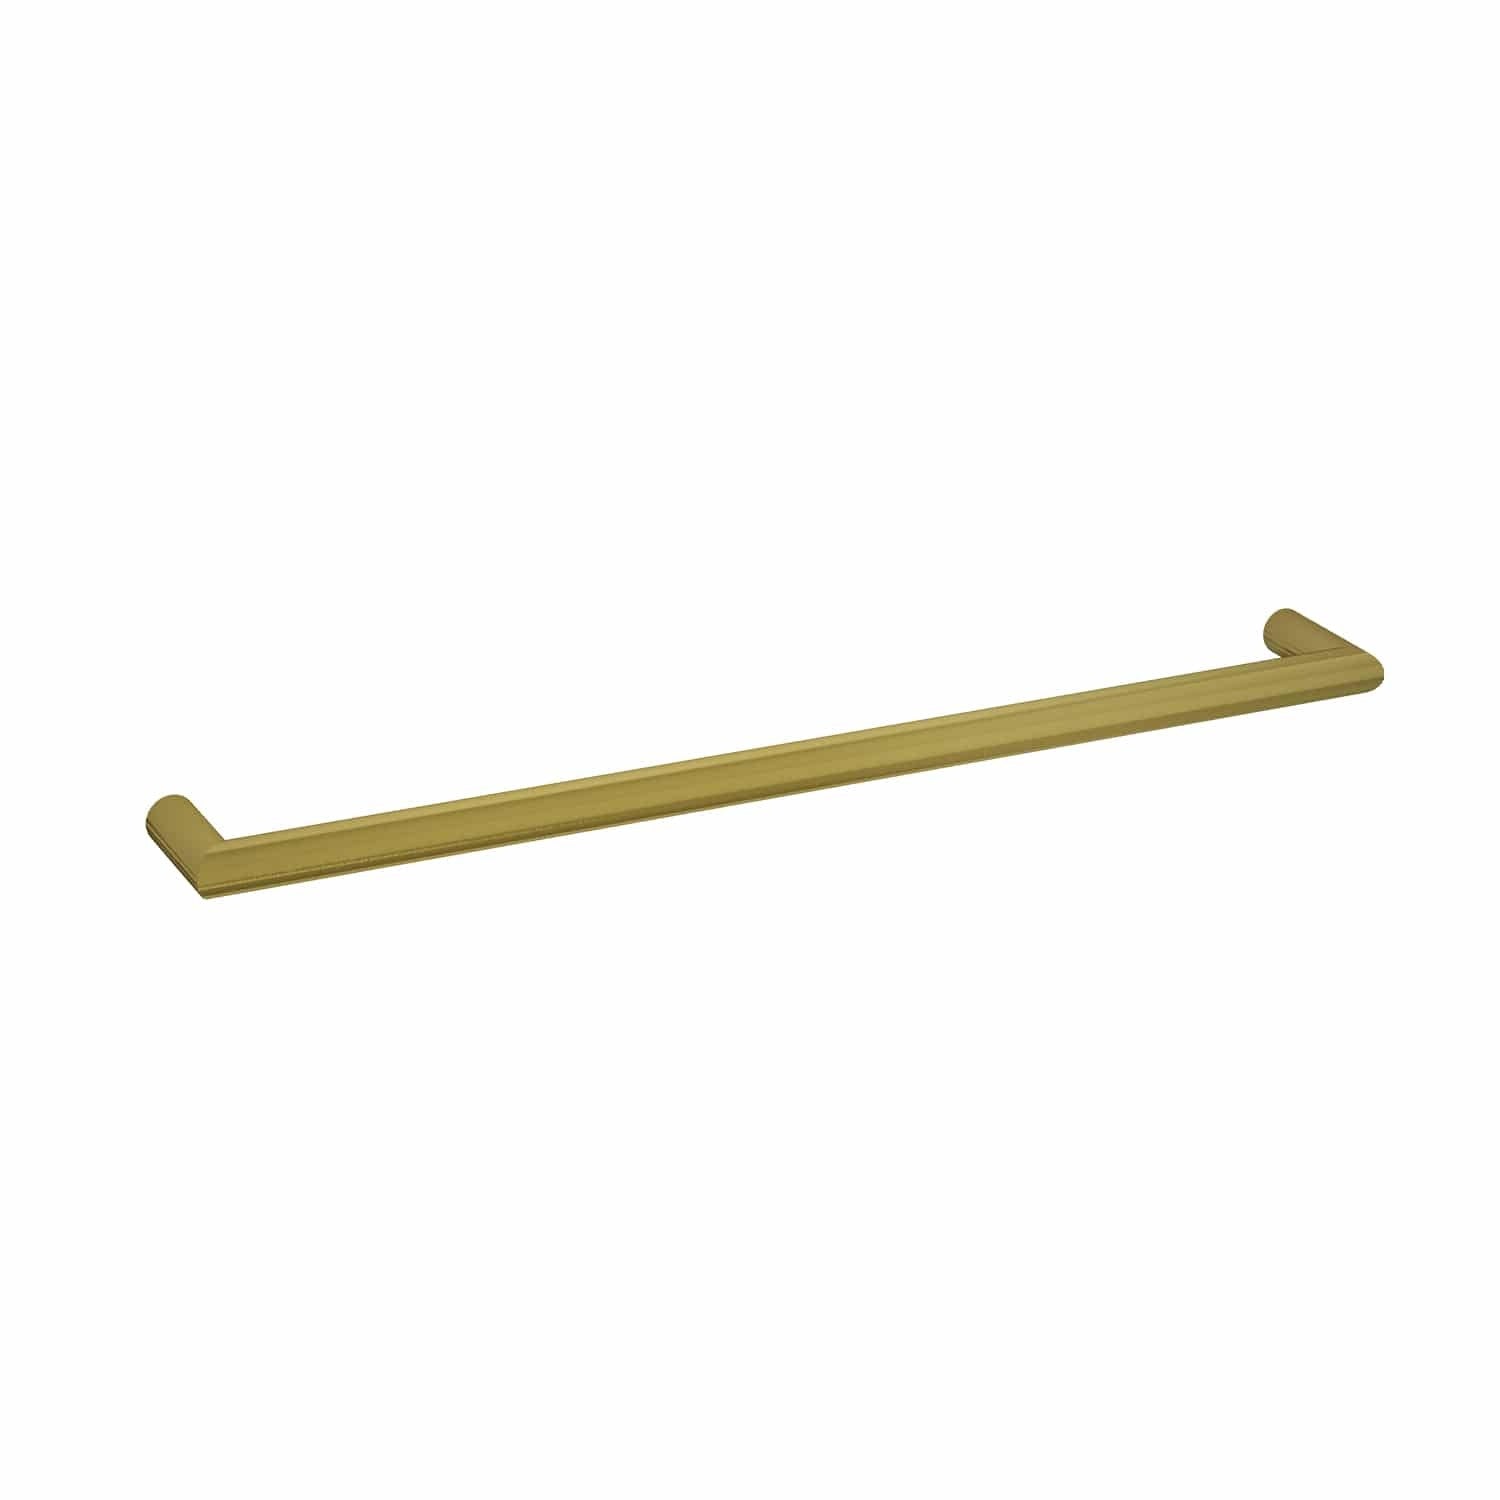 THERMOGROUP BRUSHED GOLD ROUND SINGLE BAR HEATED TOWEL RAIL 800MM